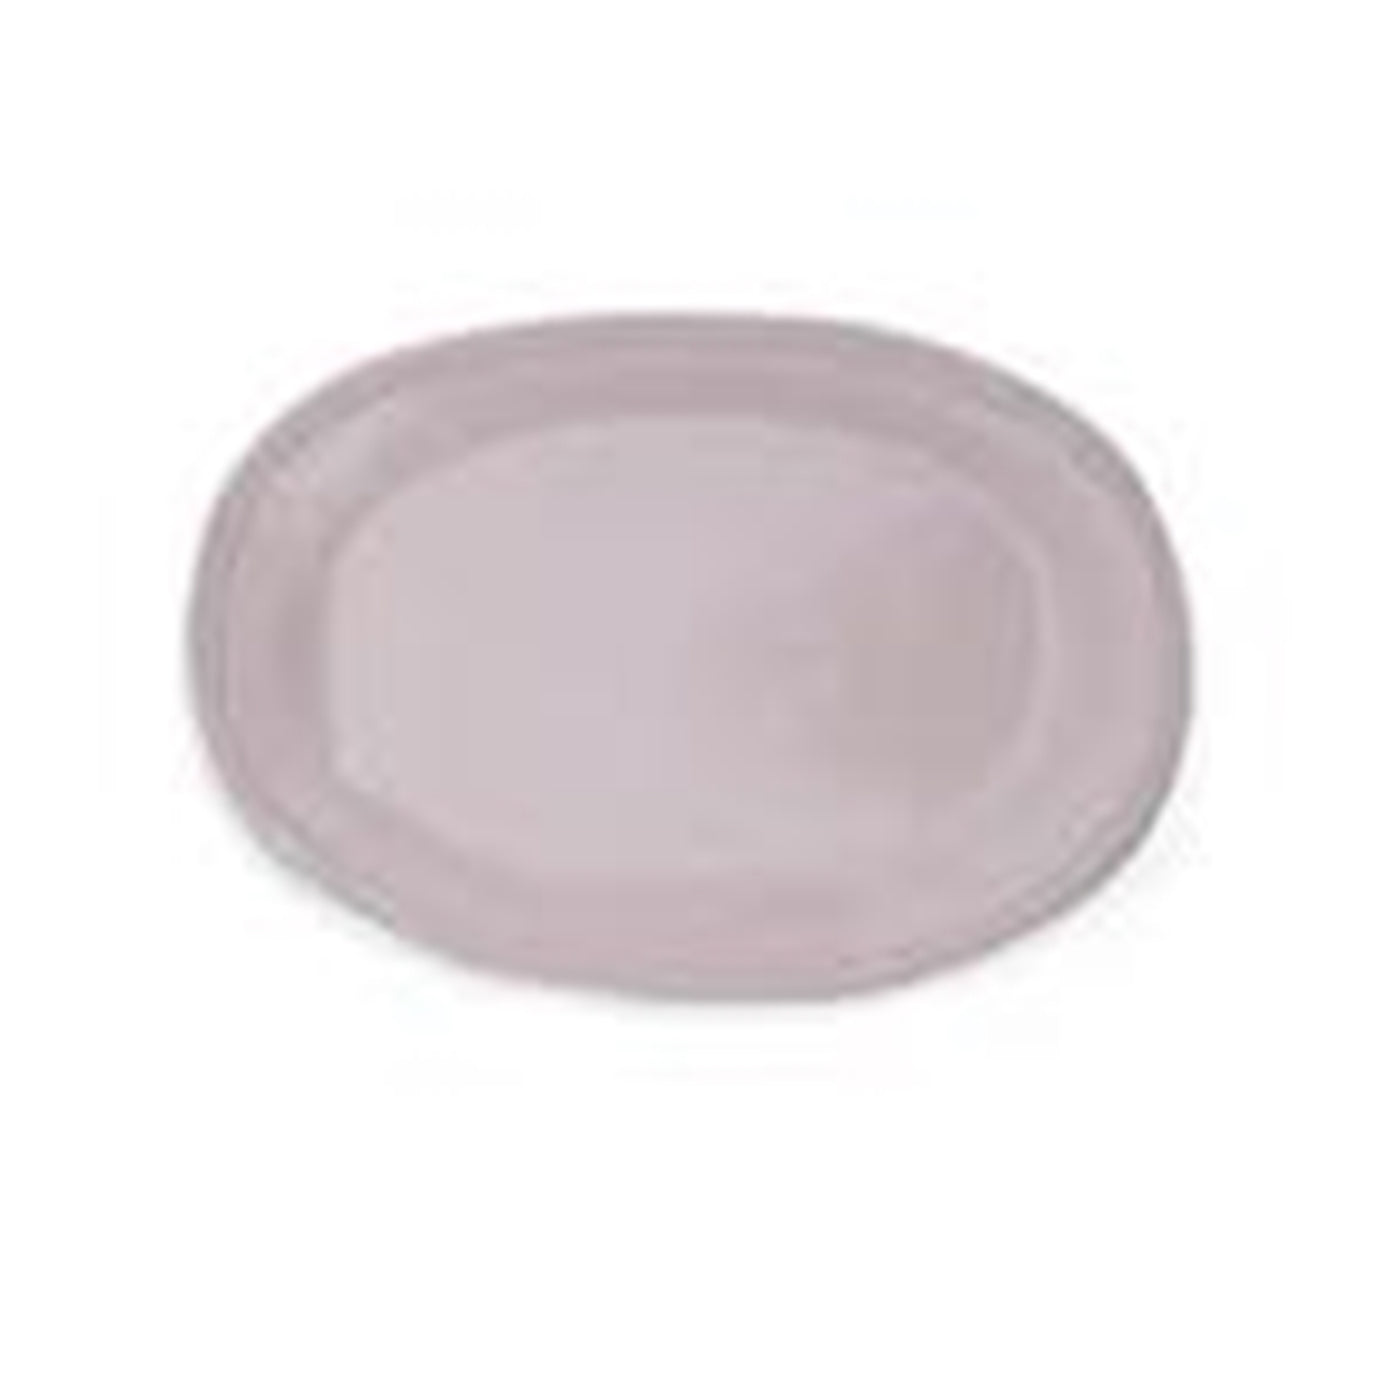 Oval Serving Platter - Double Lined  - Cream